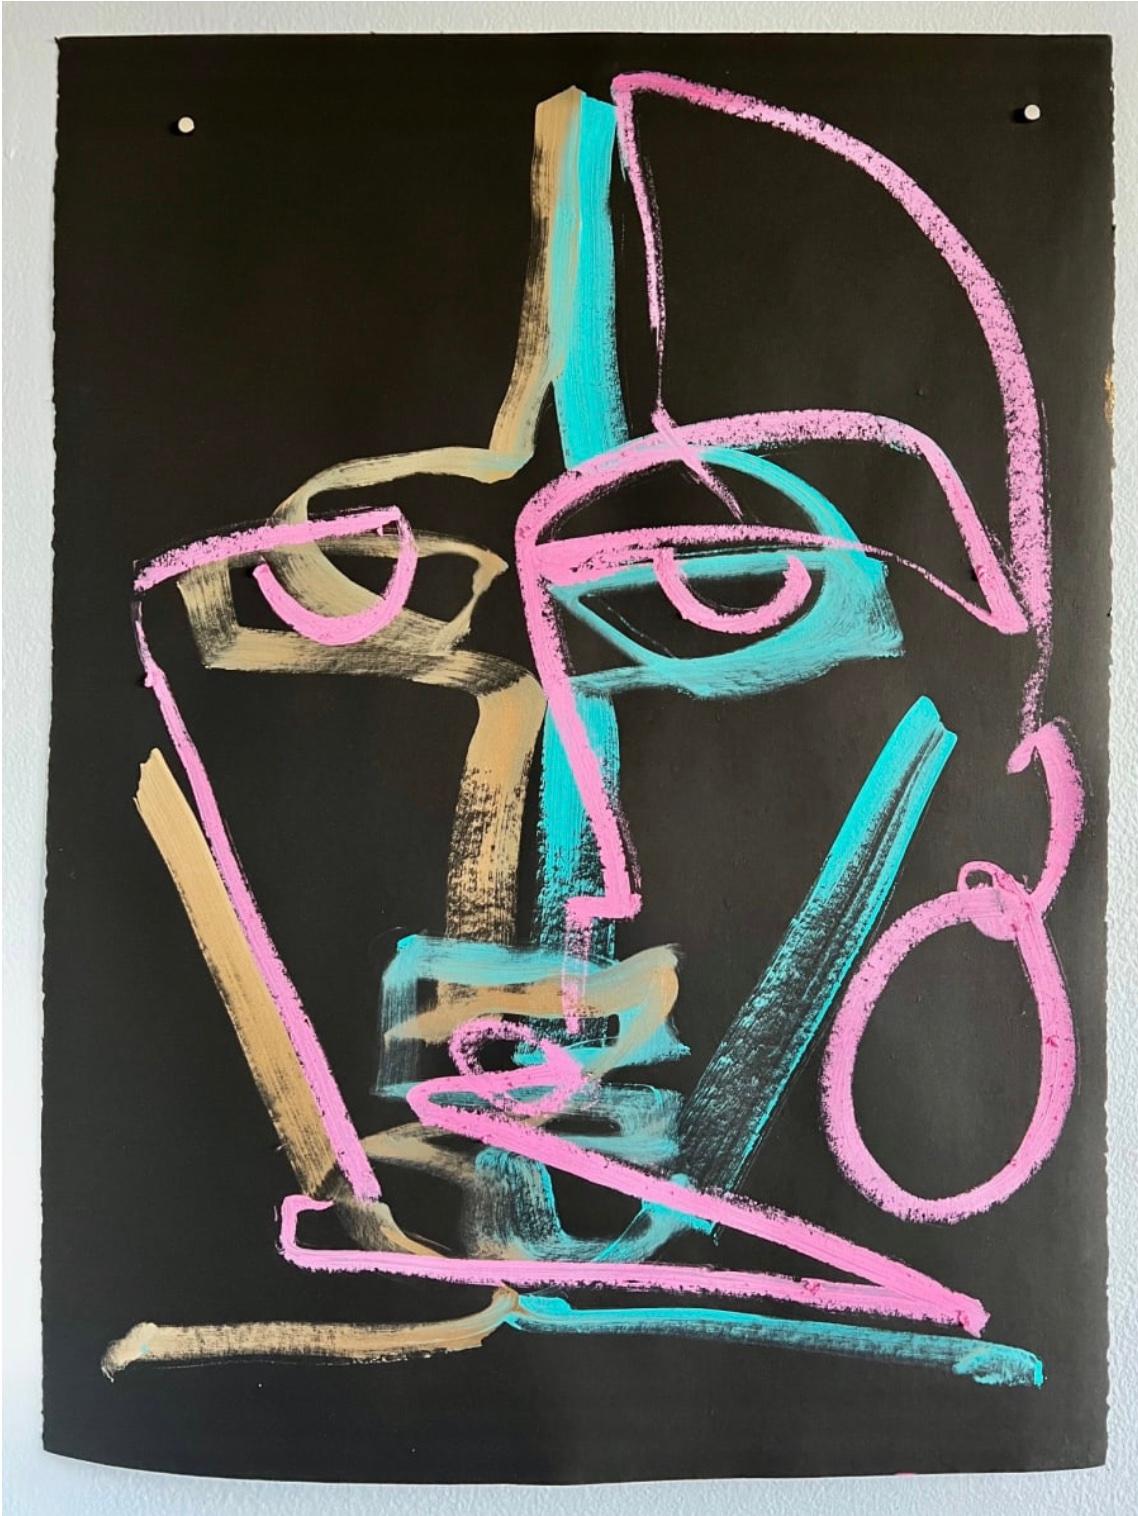 Face outline in gold, teal and pink blush strokes against black paper background. 

Unique one of a kind painting signed by the artist. 

ARTIST BIO 
Alice Mizrachi is a New York based interdisciplinary artist and educator working in the mediums of